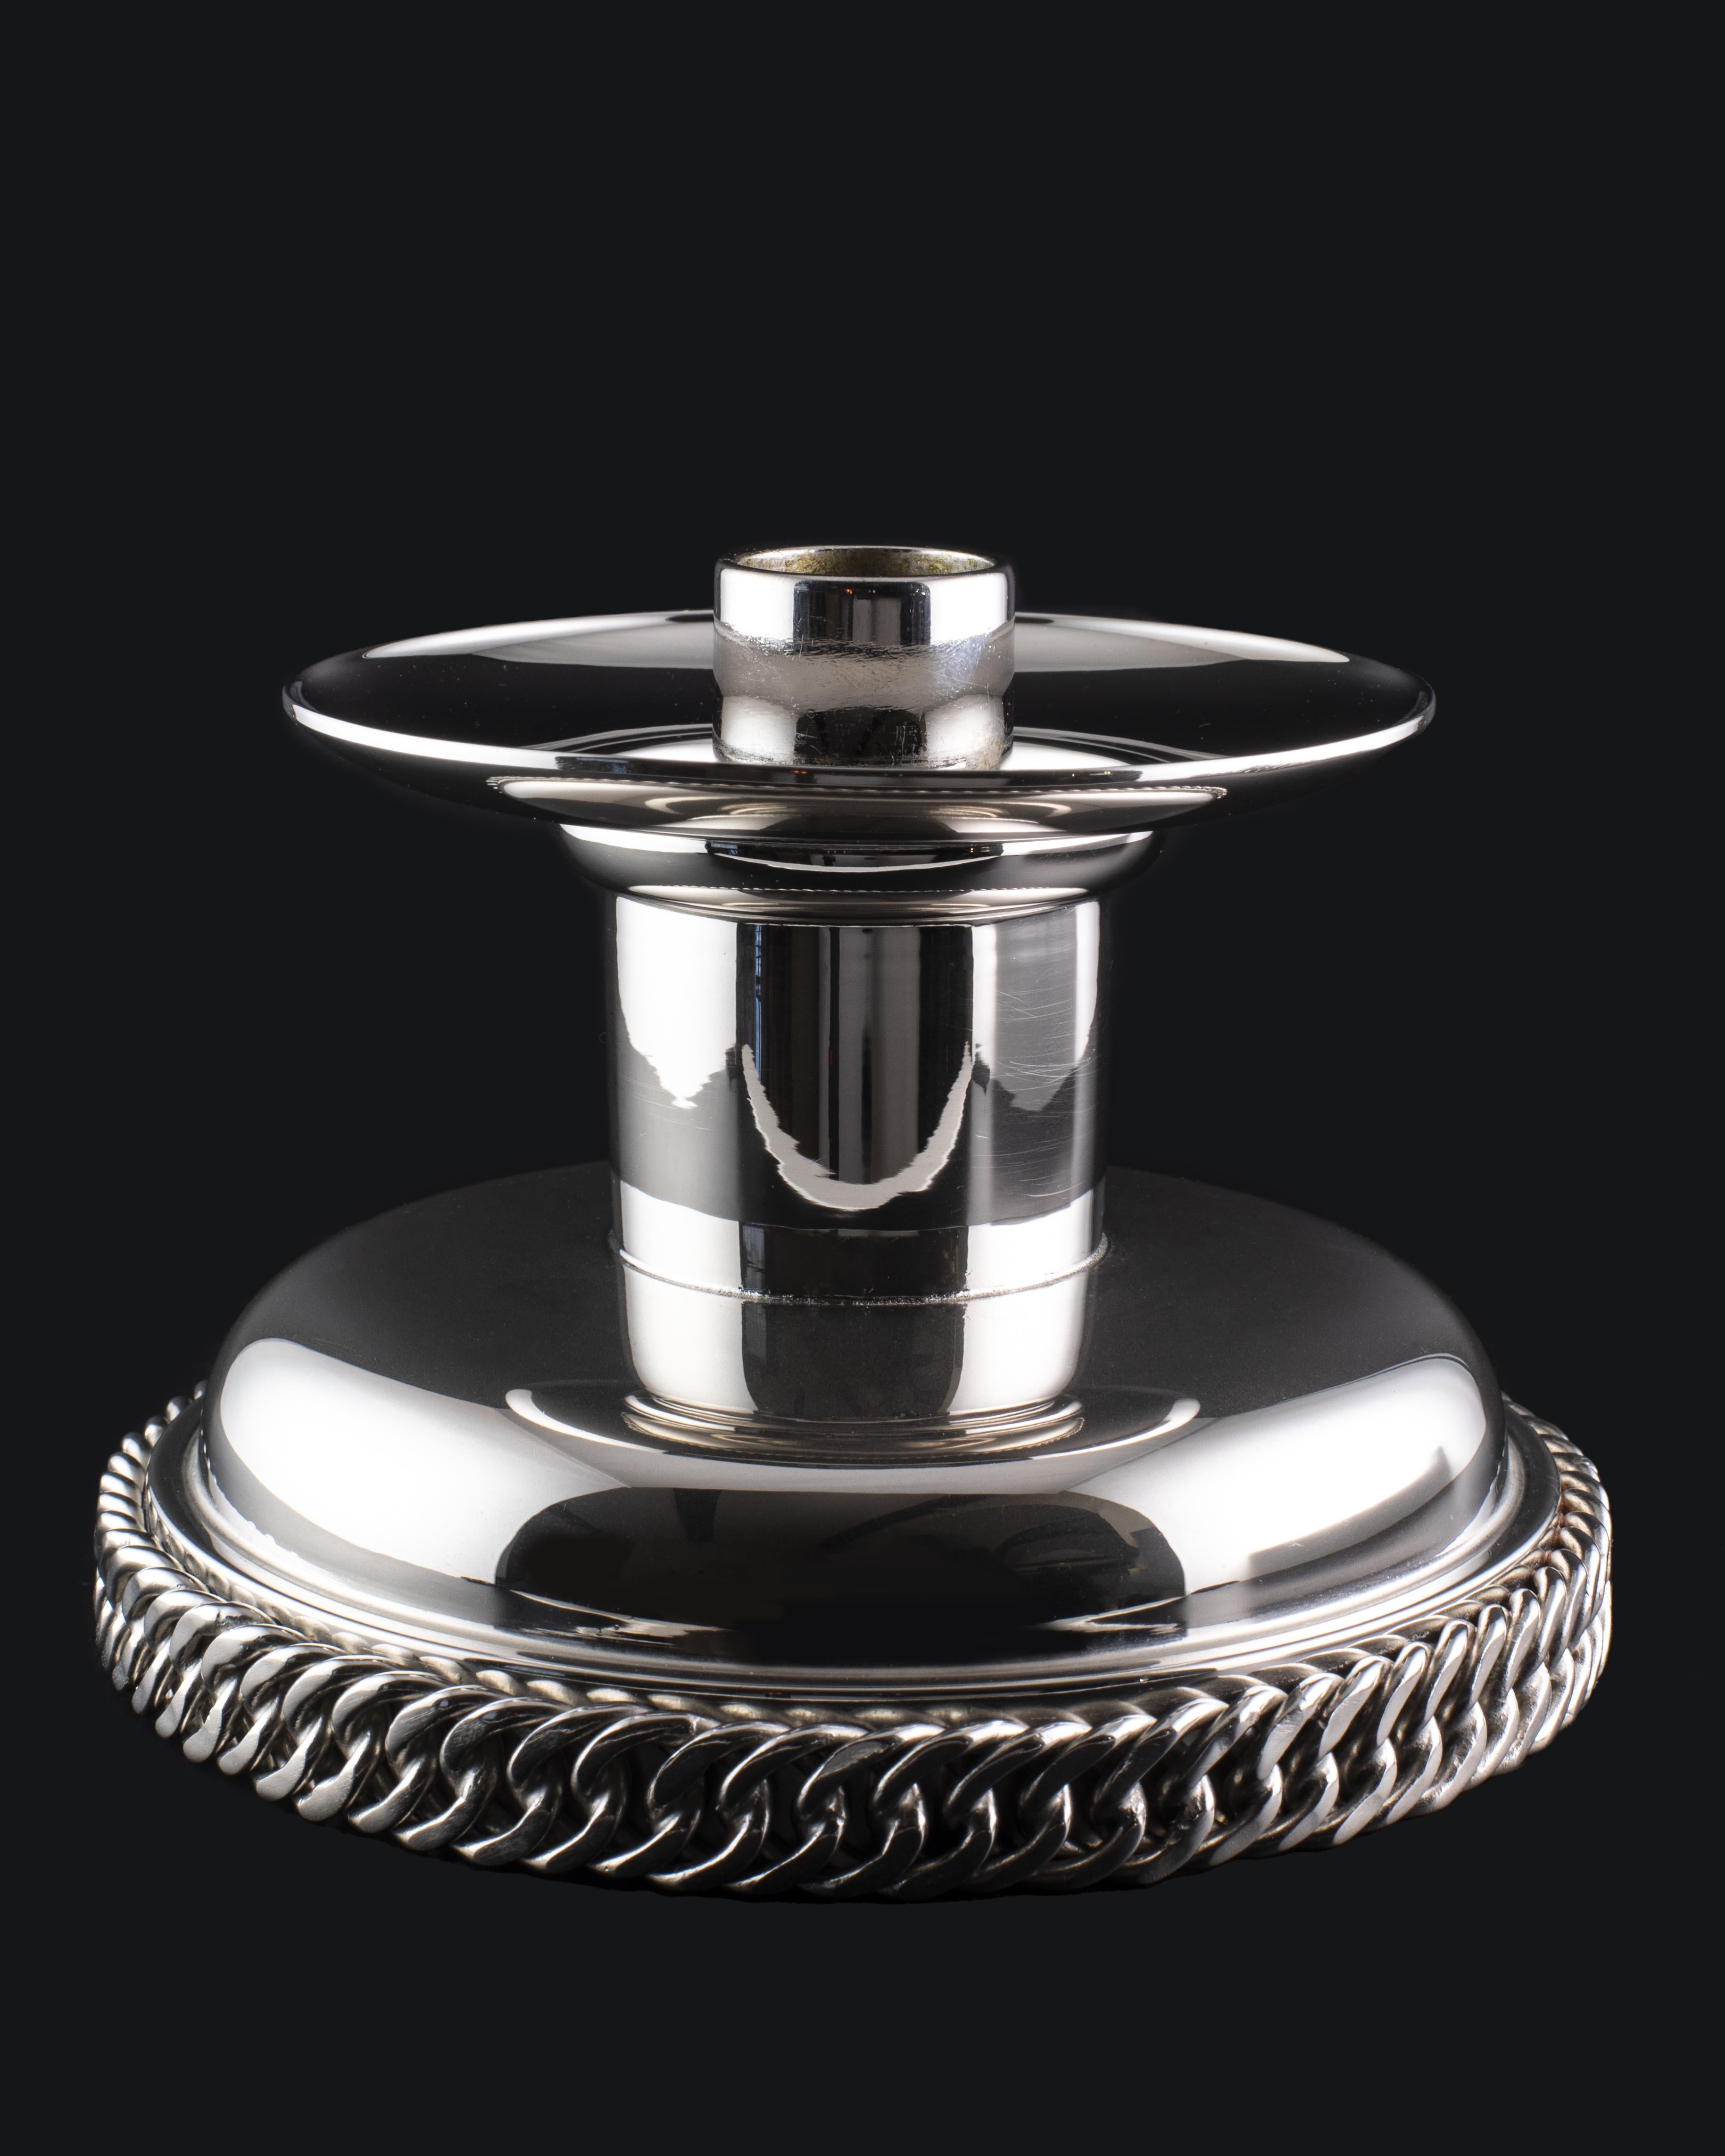 Stunning candlestick from Hermès Paris made in Metal argenté. The holder is simply beautiful with its discreet elegance and design. Embellished with the iconic Hermès chain that gives a touch of contemporary look. The candlestick is clearly marked